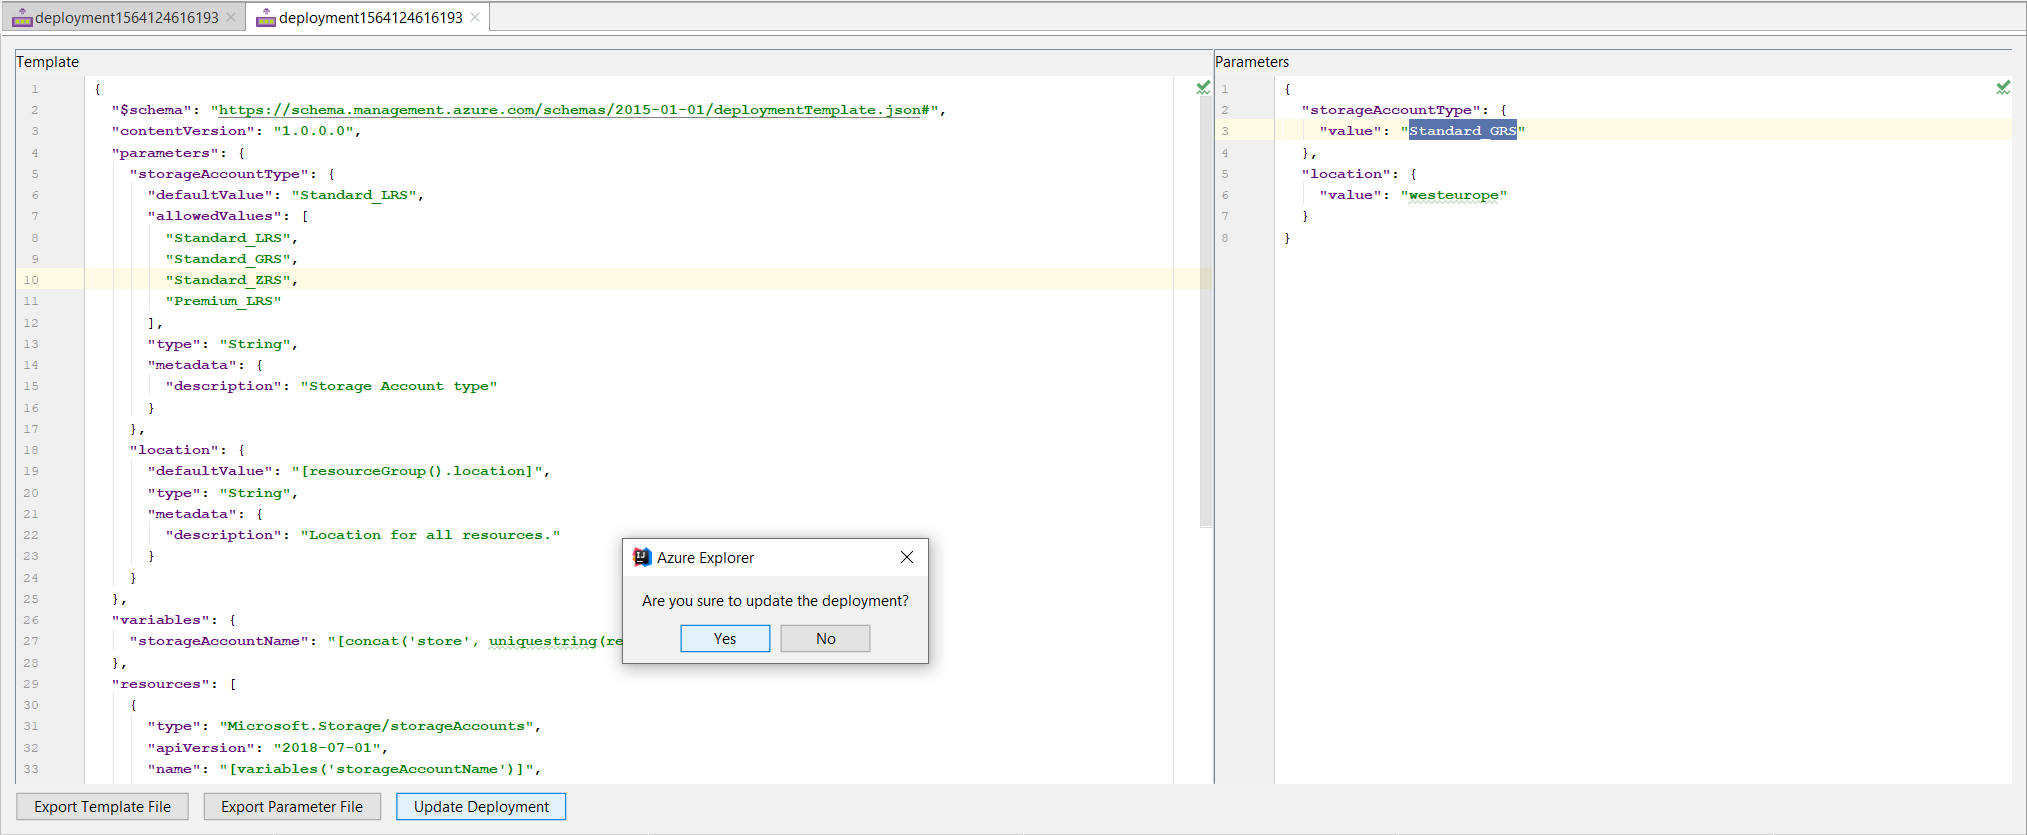 Screenshot shows the Resource Manager template with the Update Deployment prompt displayed.